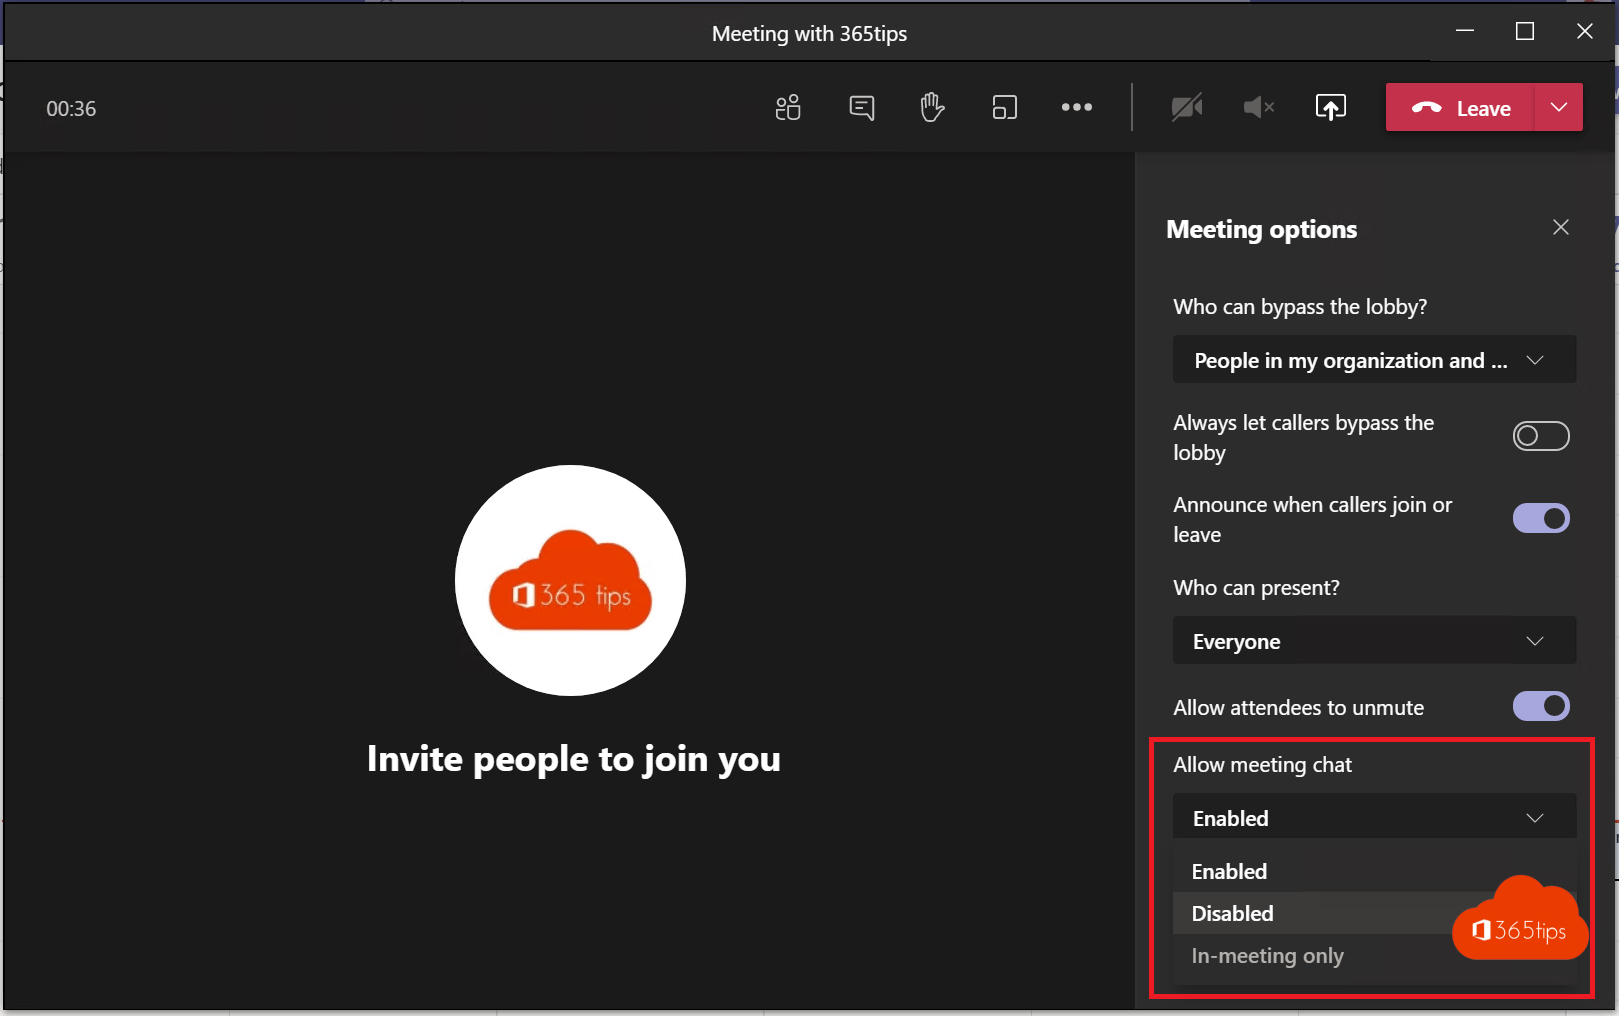 How can you disable or limit chatting during or after a Teams meeting?